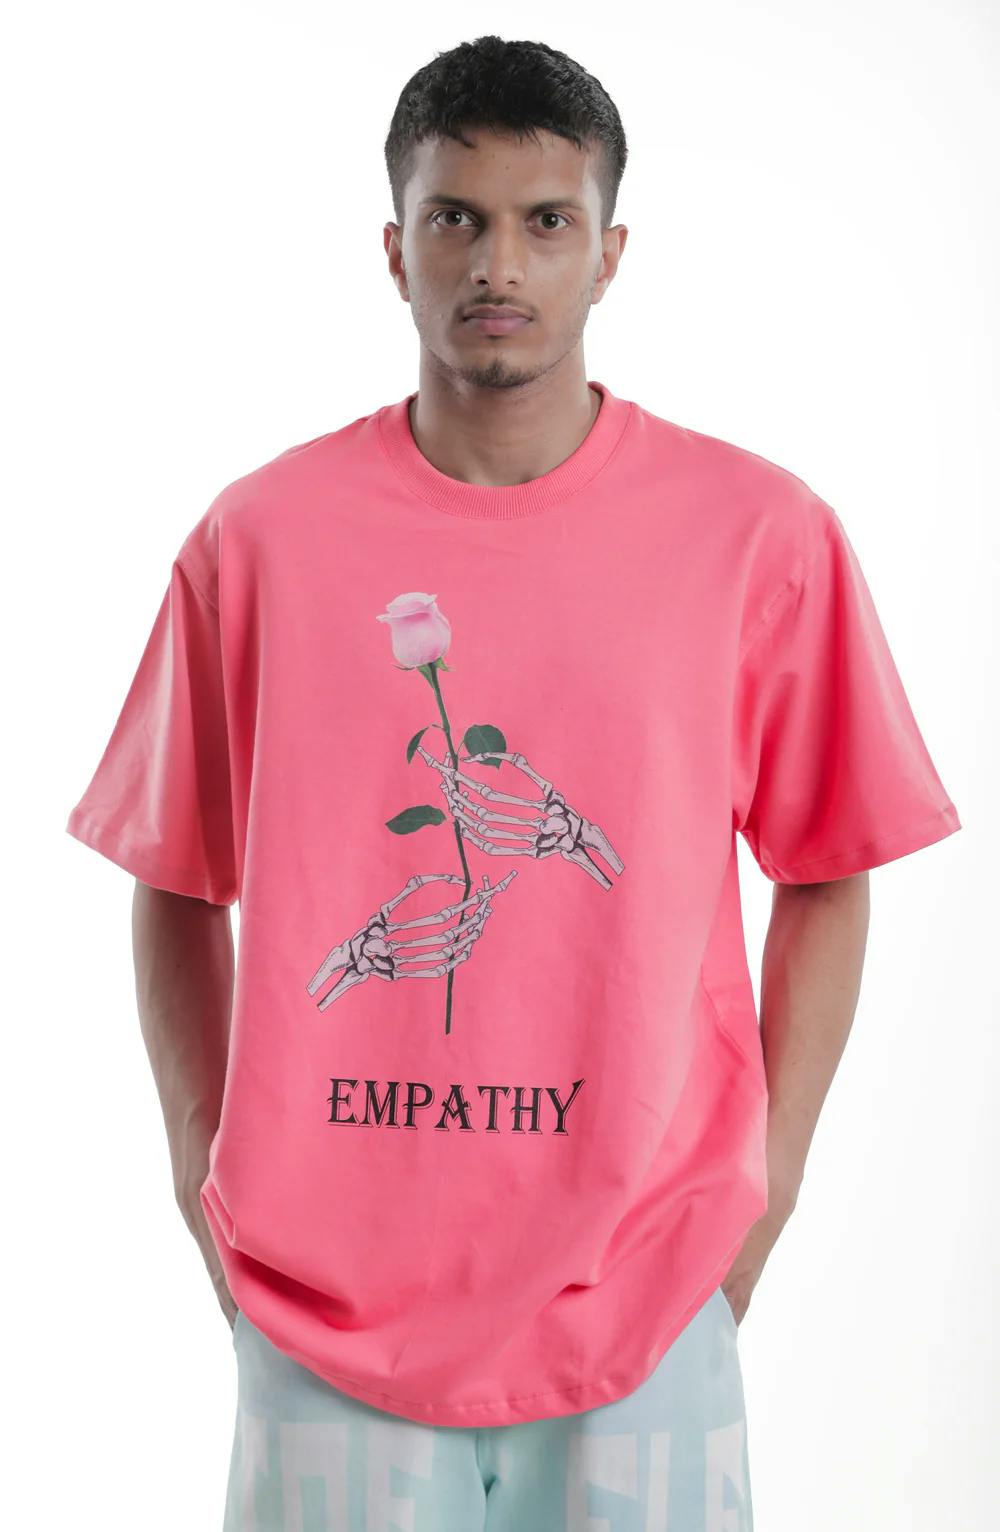 Empathy T-shirt, a product by TOFFLE